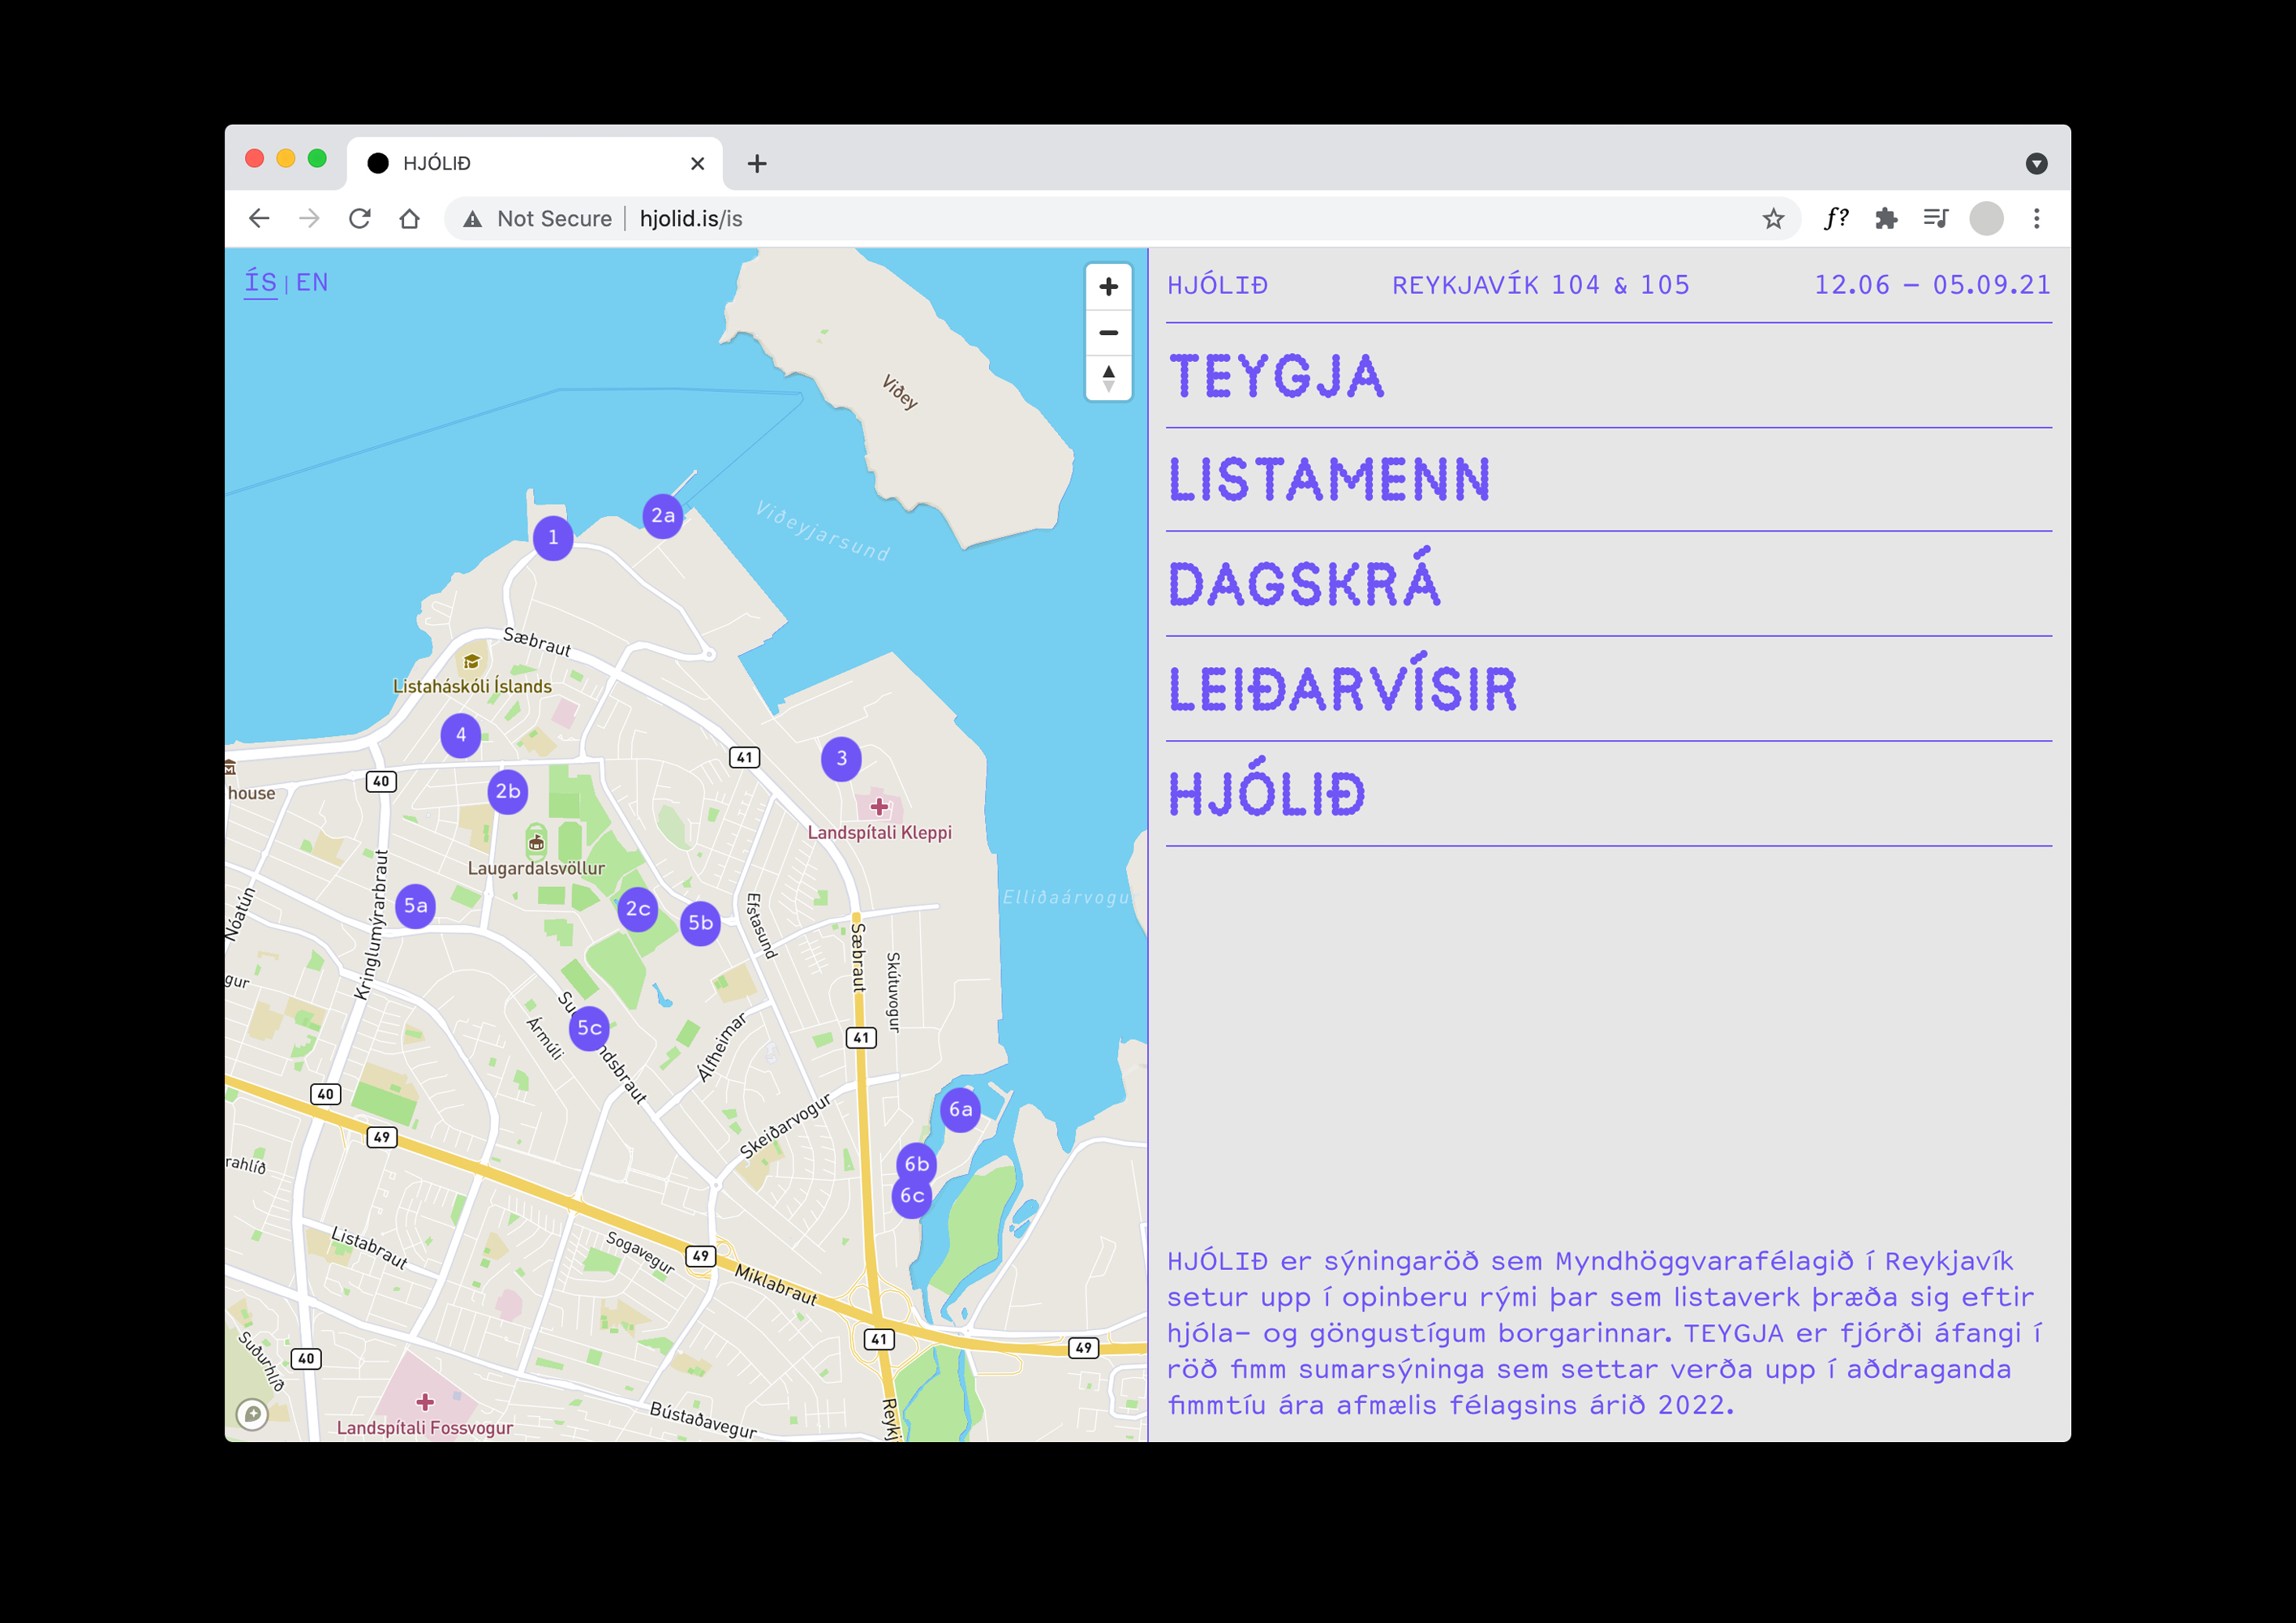 browser window on a black background. The website is vertically split in half. One half is a map with purple markers, and the other half is a menu. The menu is set in a purple display font, the background is a light gray.